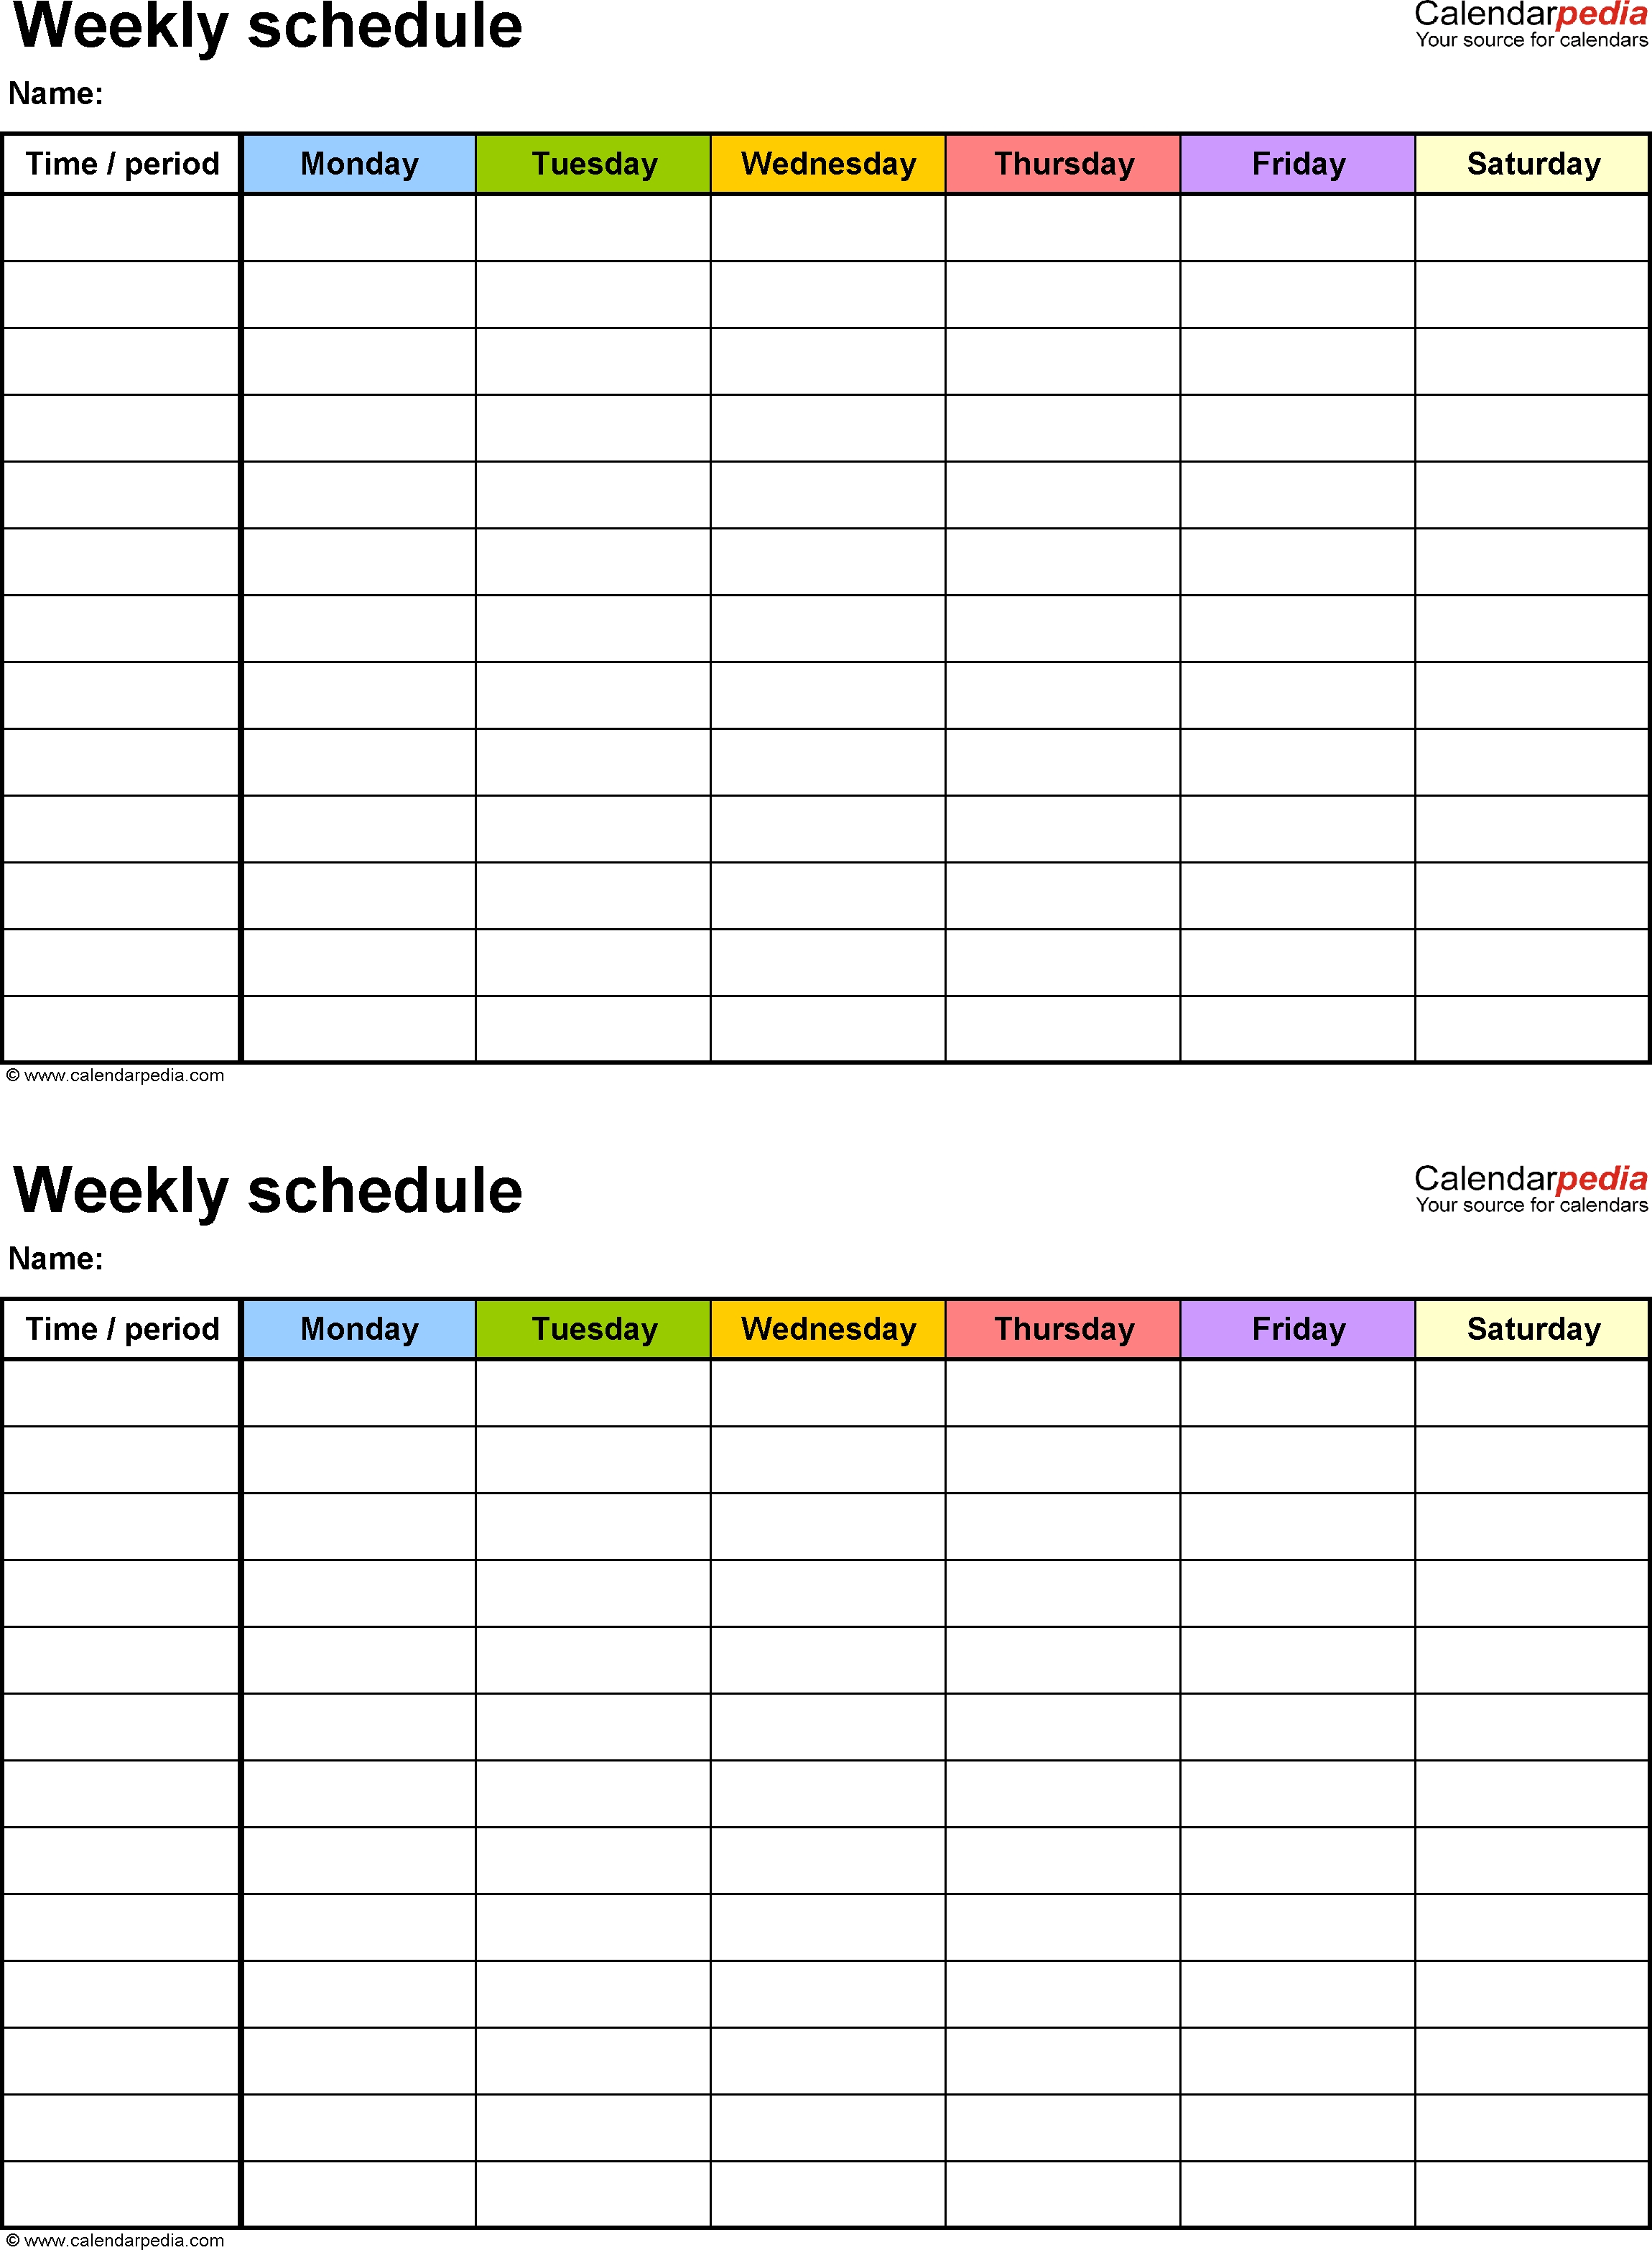 Free Weekly Schedule Templates For Pdf - 18 Templates